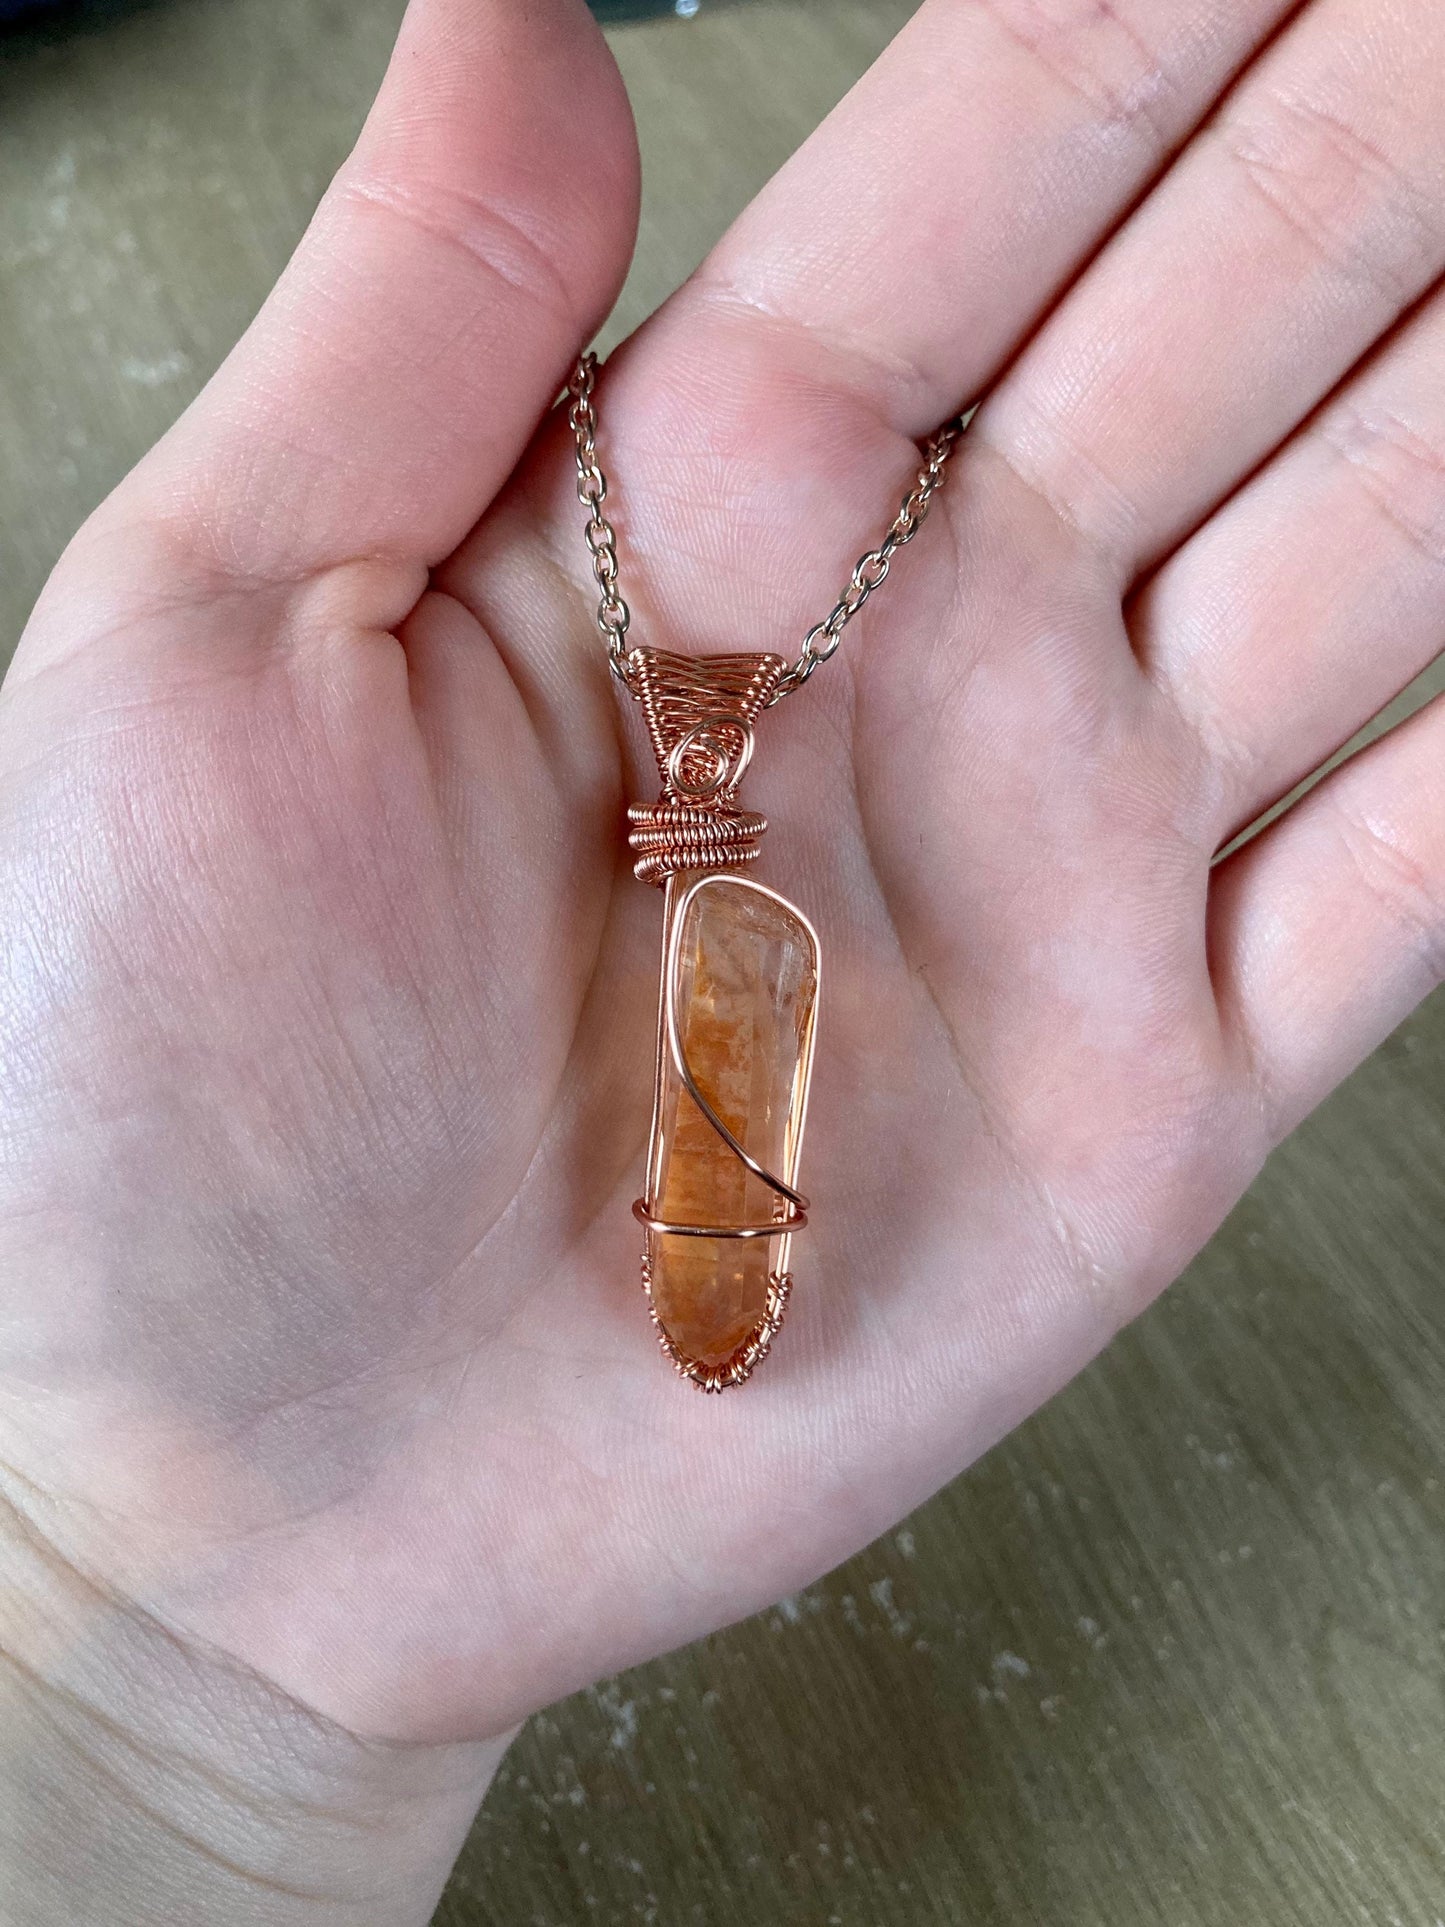 Tangerine quartz pendant handmade necklace wire wrapped natural stone with 18 inch length chain